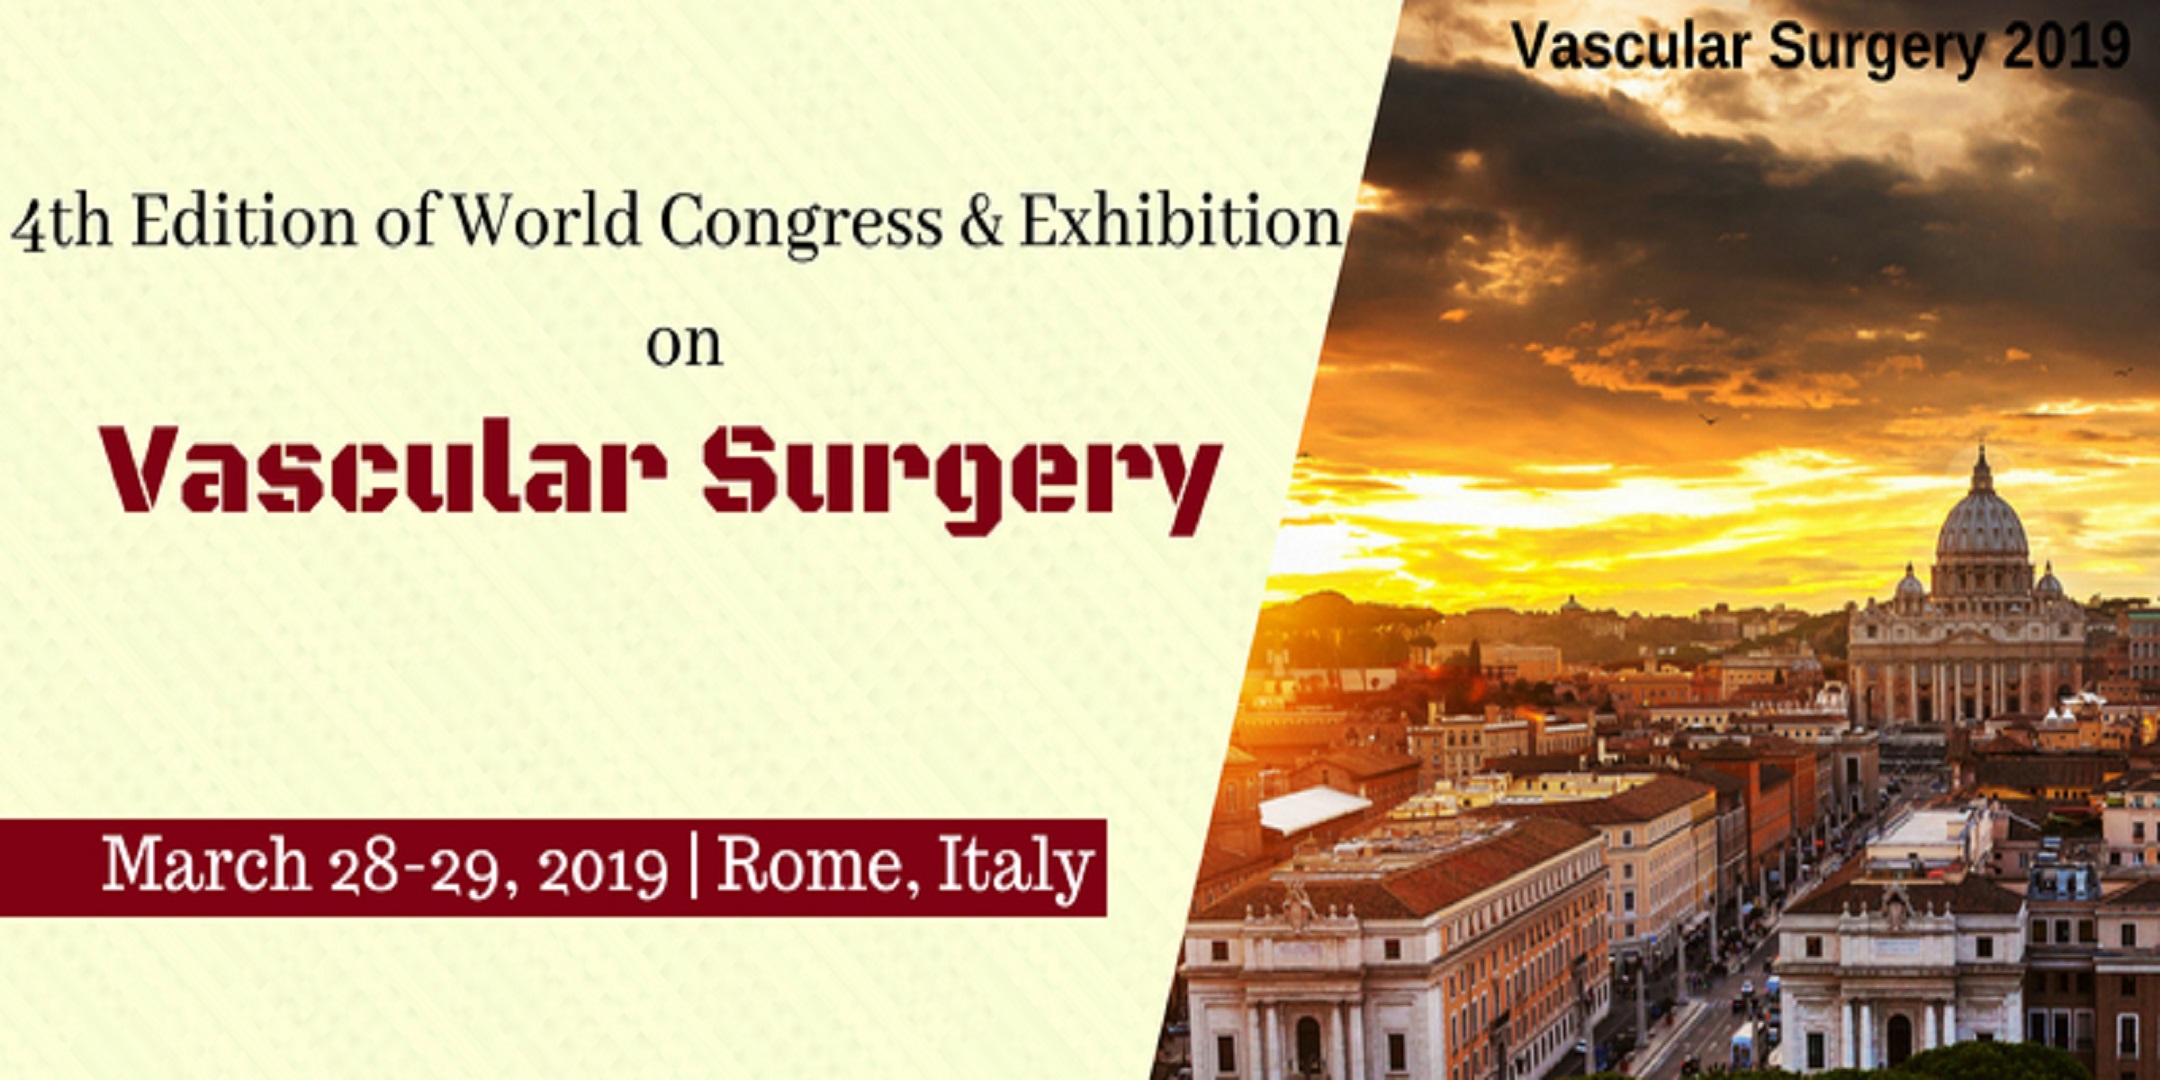 4th Edition of World Congress & Exhibition on Vascular Surgery, Rome, Italy